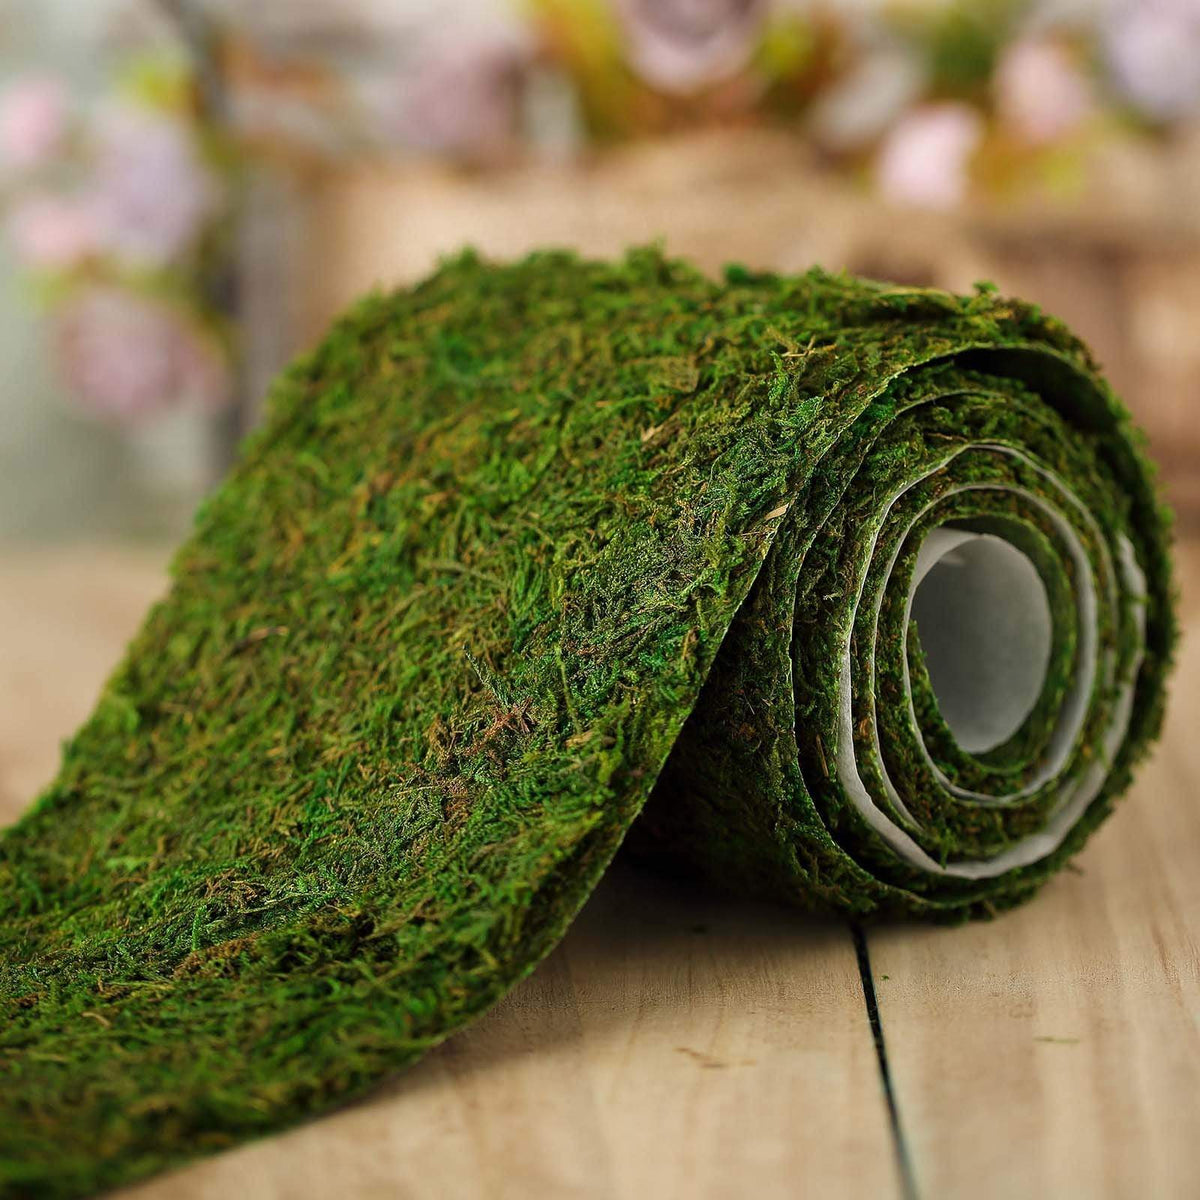 18x16 in Green Natural Preserved Moss Sheet Party Crafts Supplies